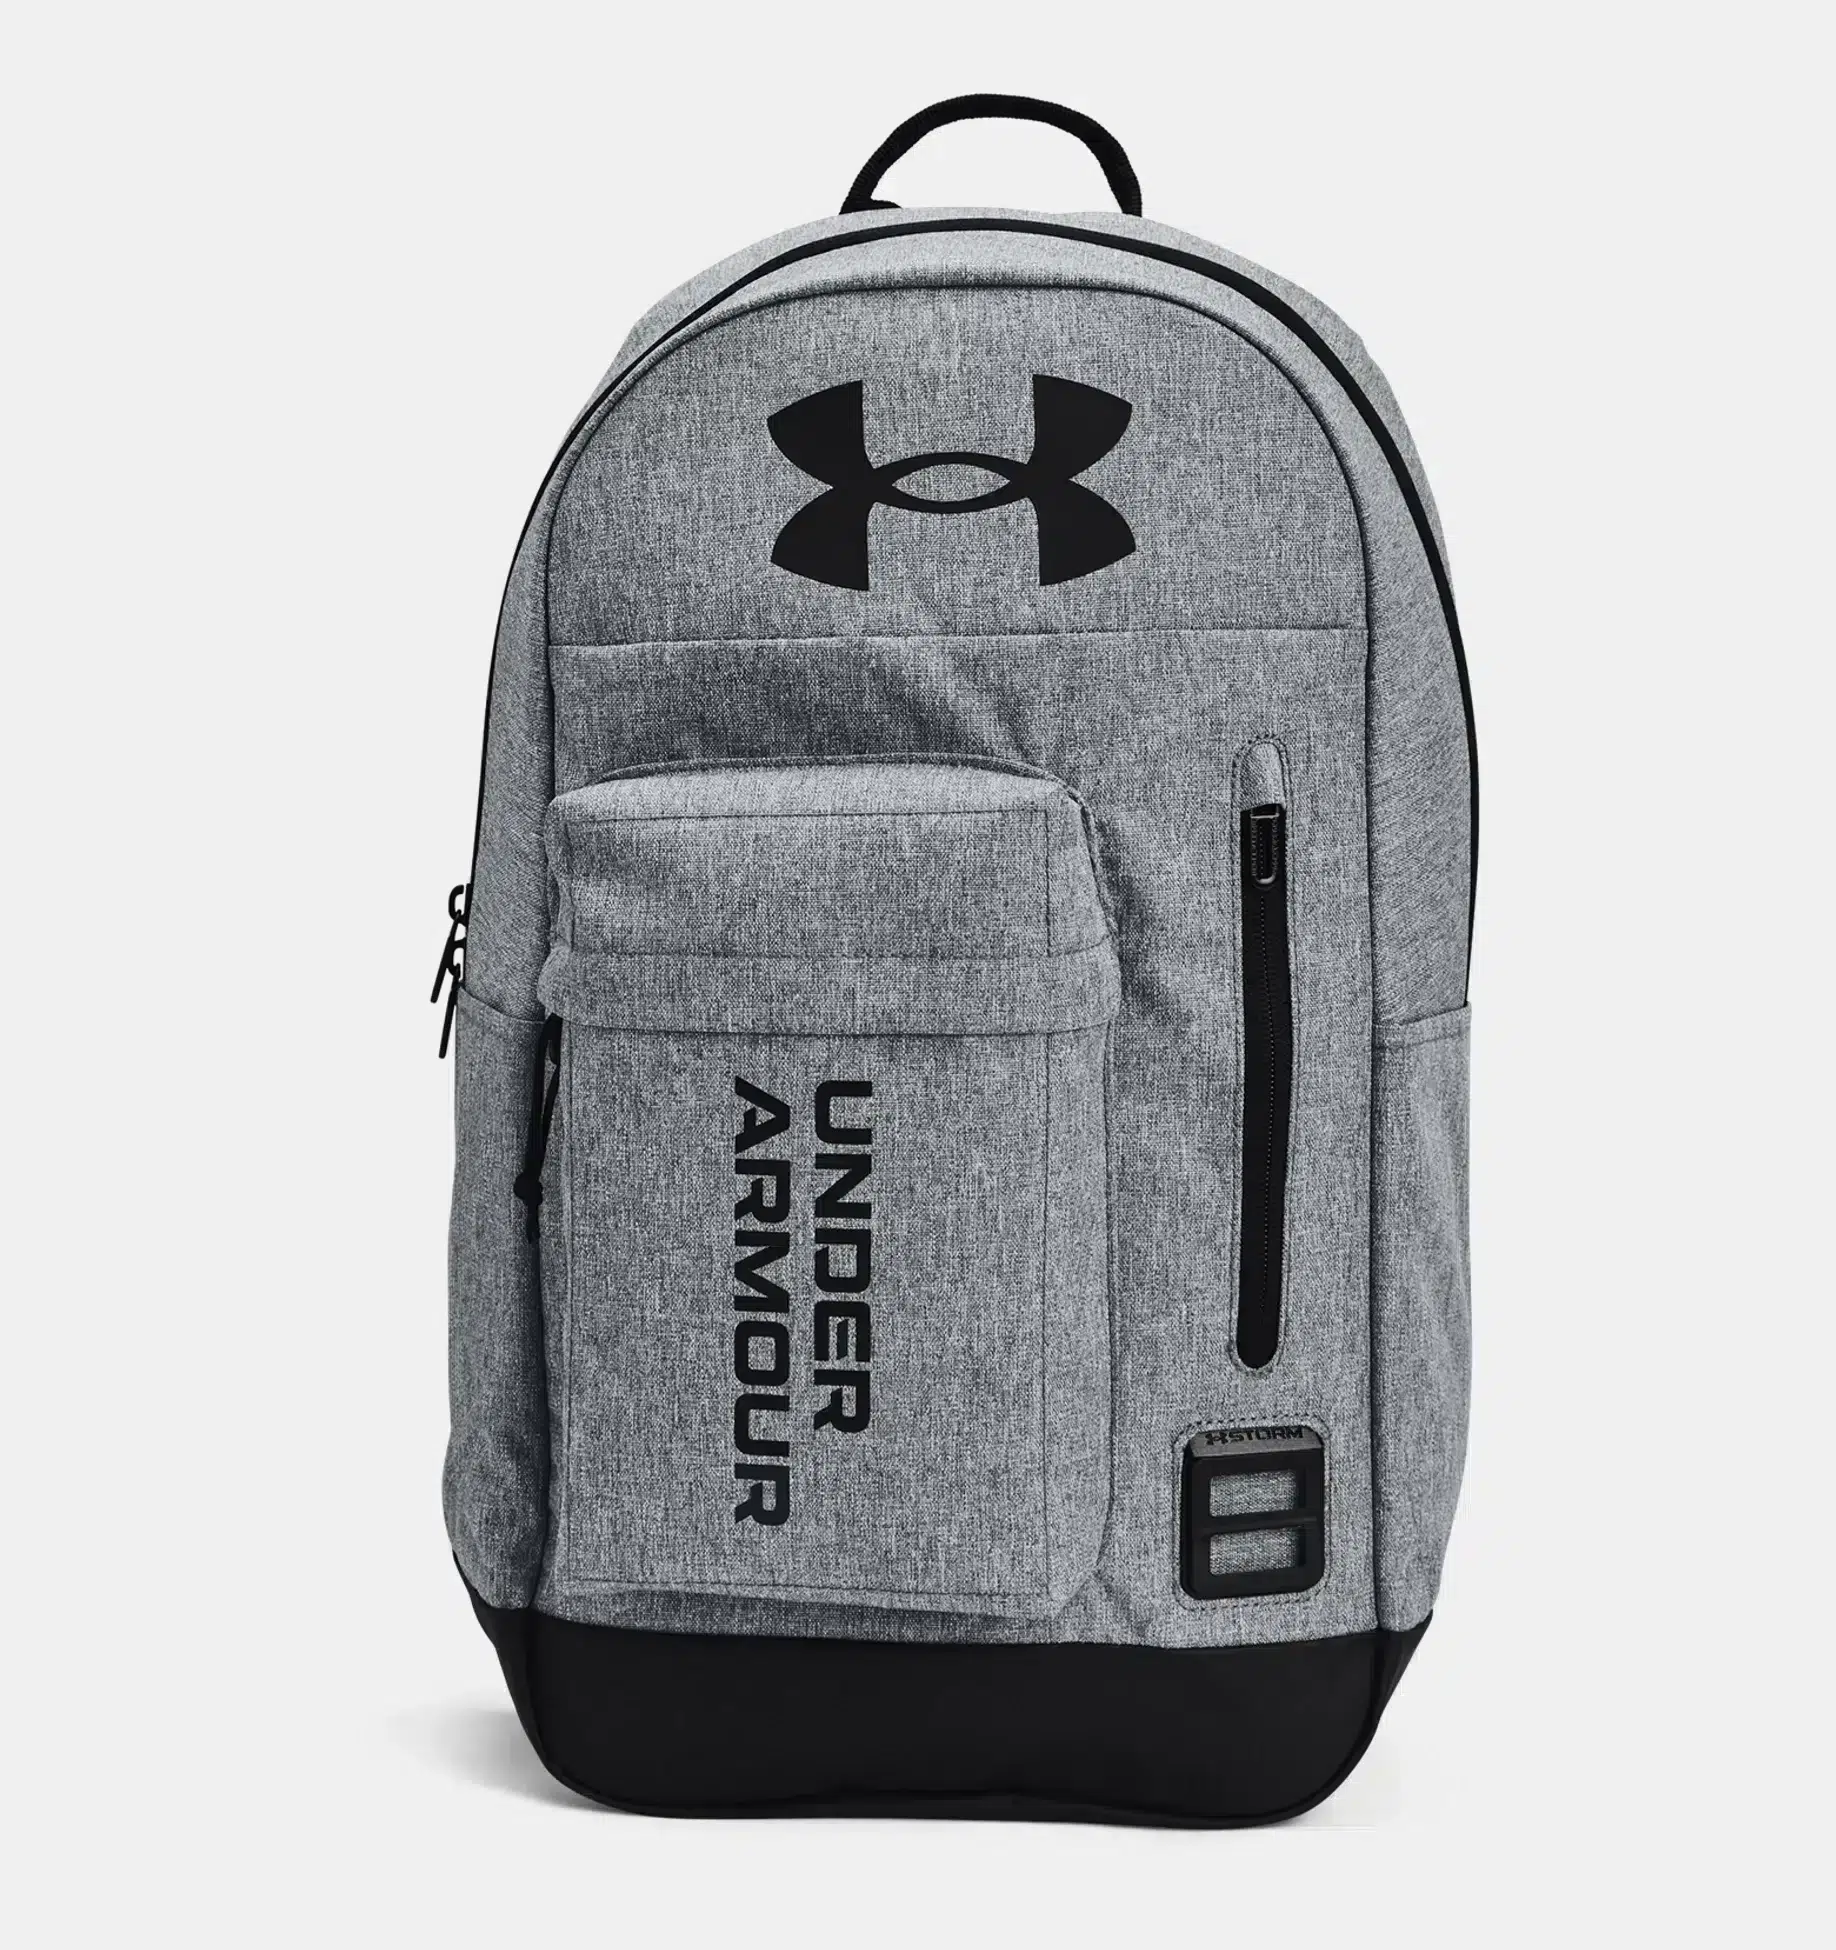 Under Armour - Halftime Backpack - Pitch Gray / Black